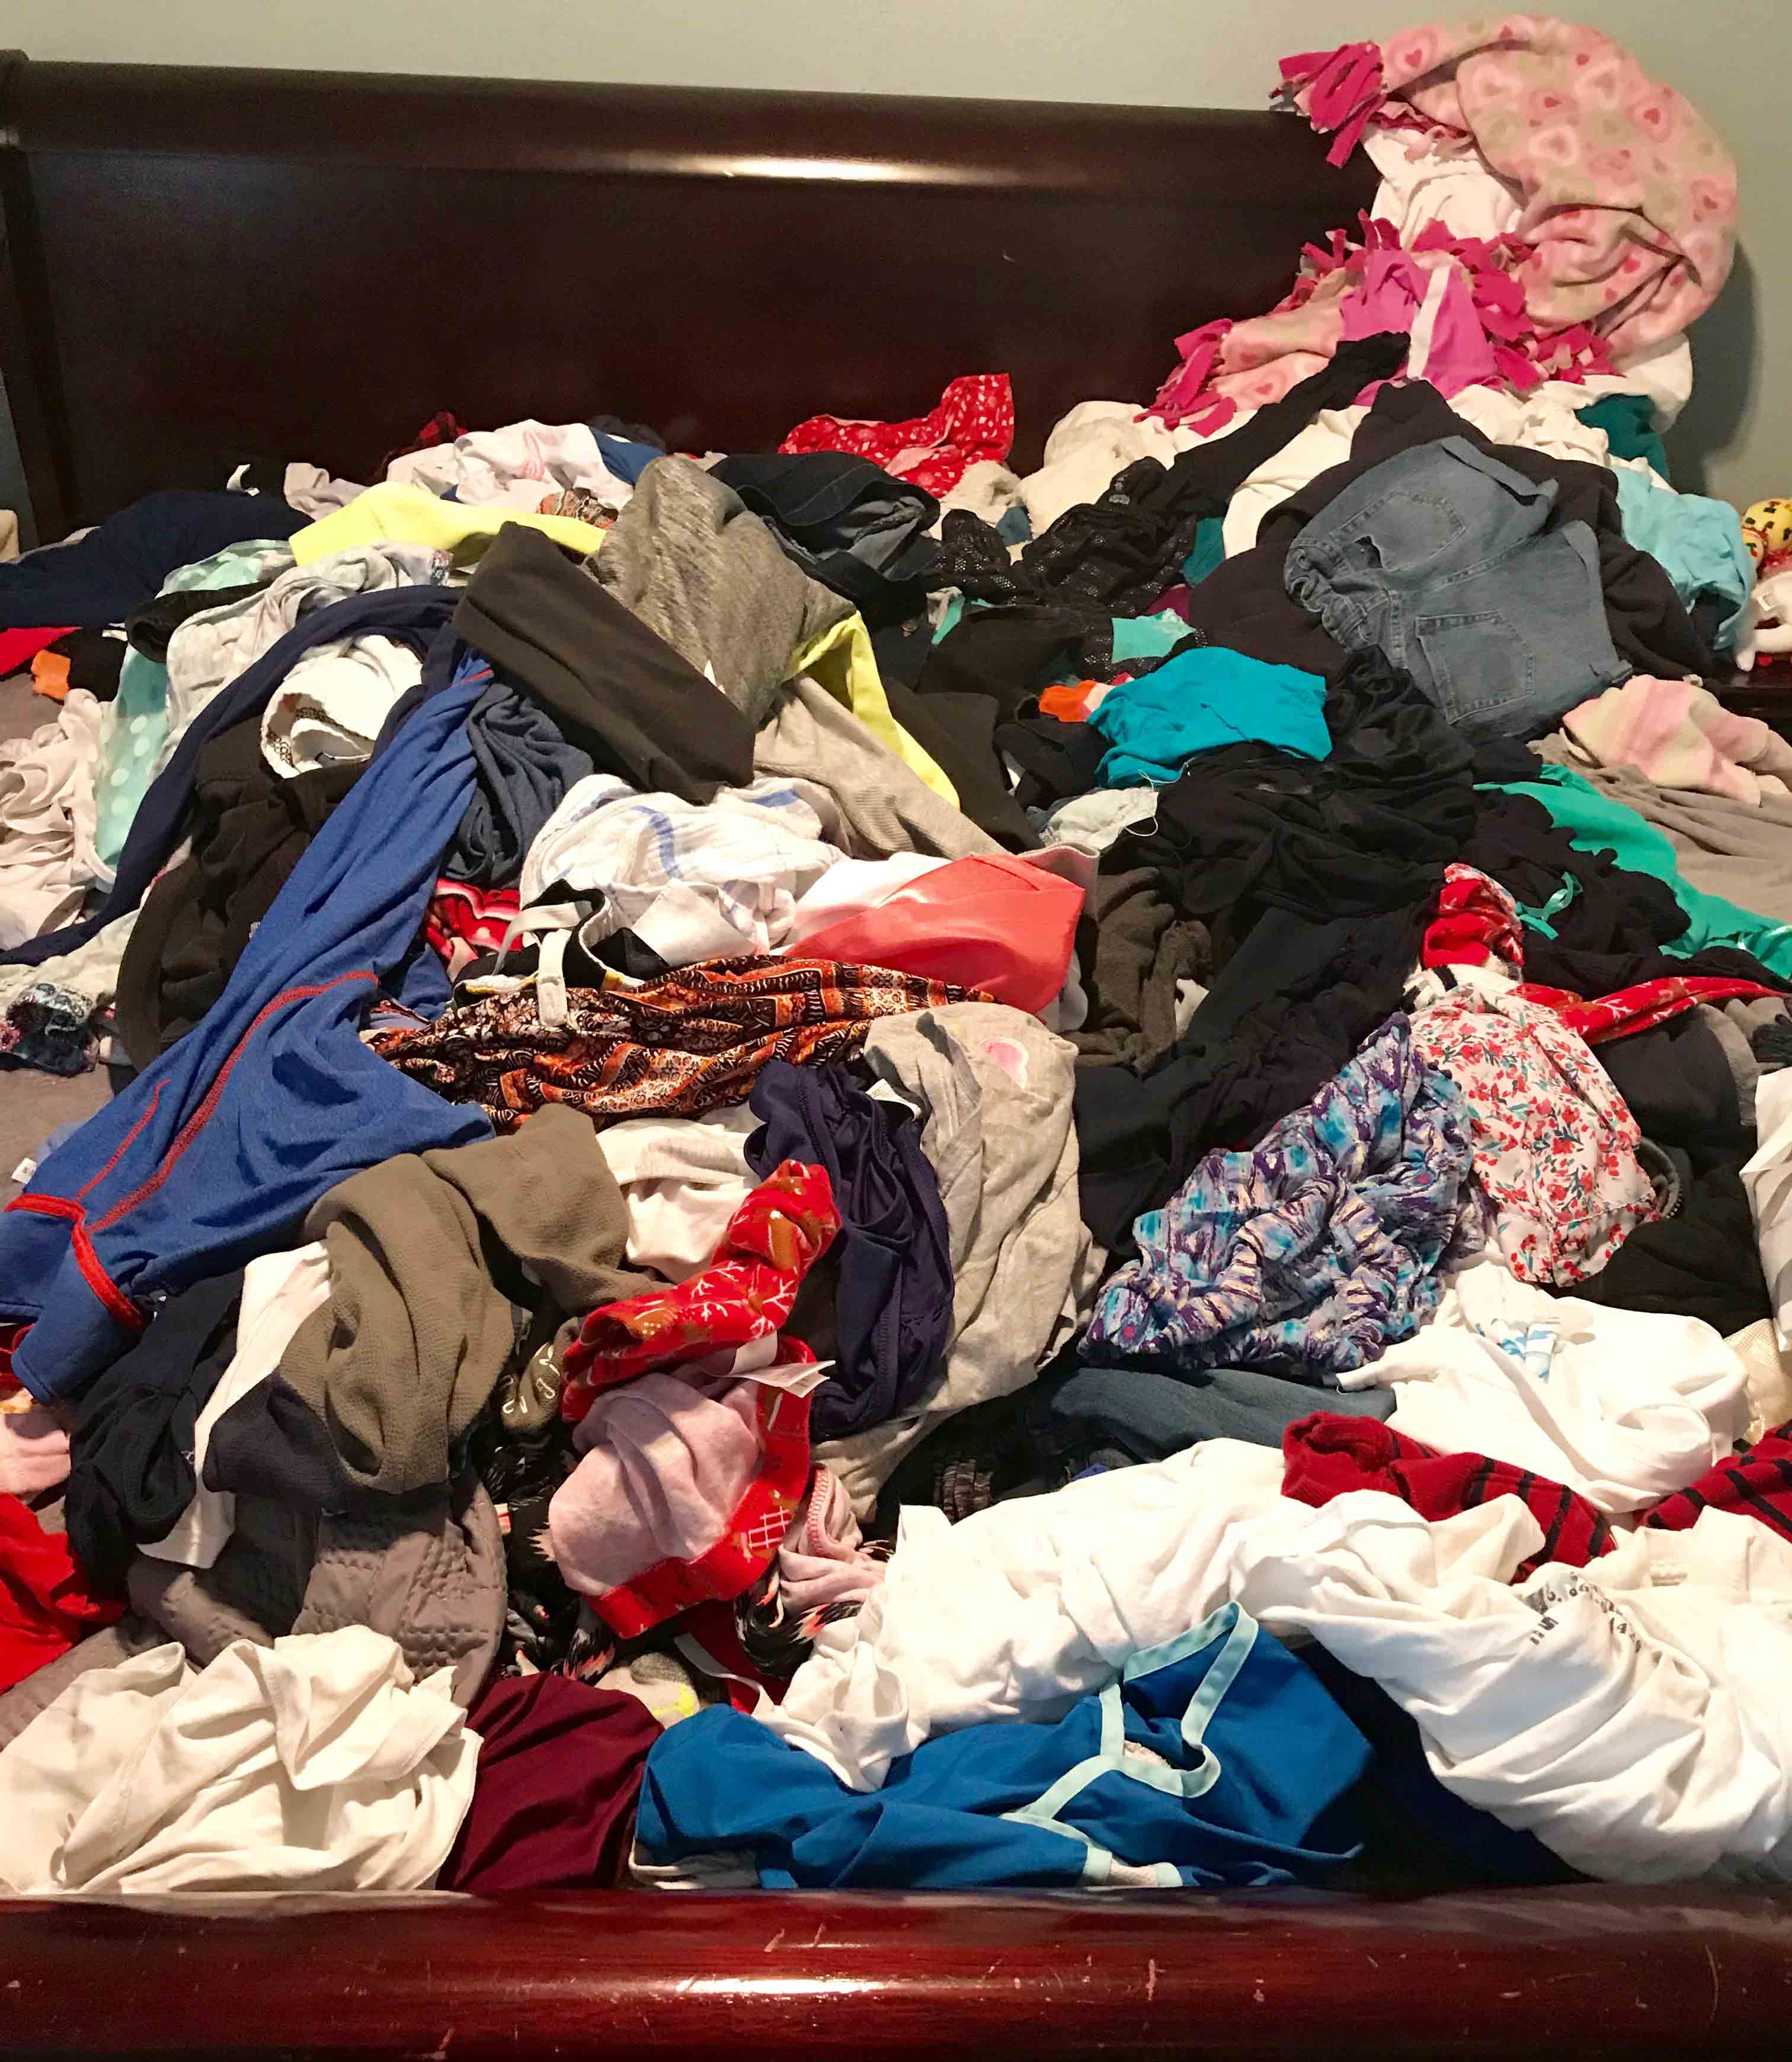 BEFORE-BEDROOM-PILE-OF-CLOTHES-copy